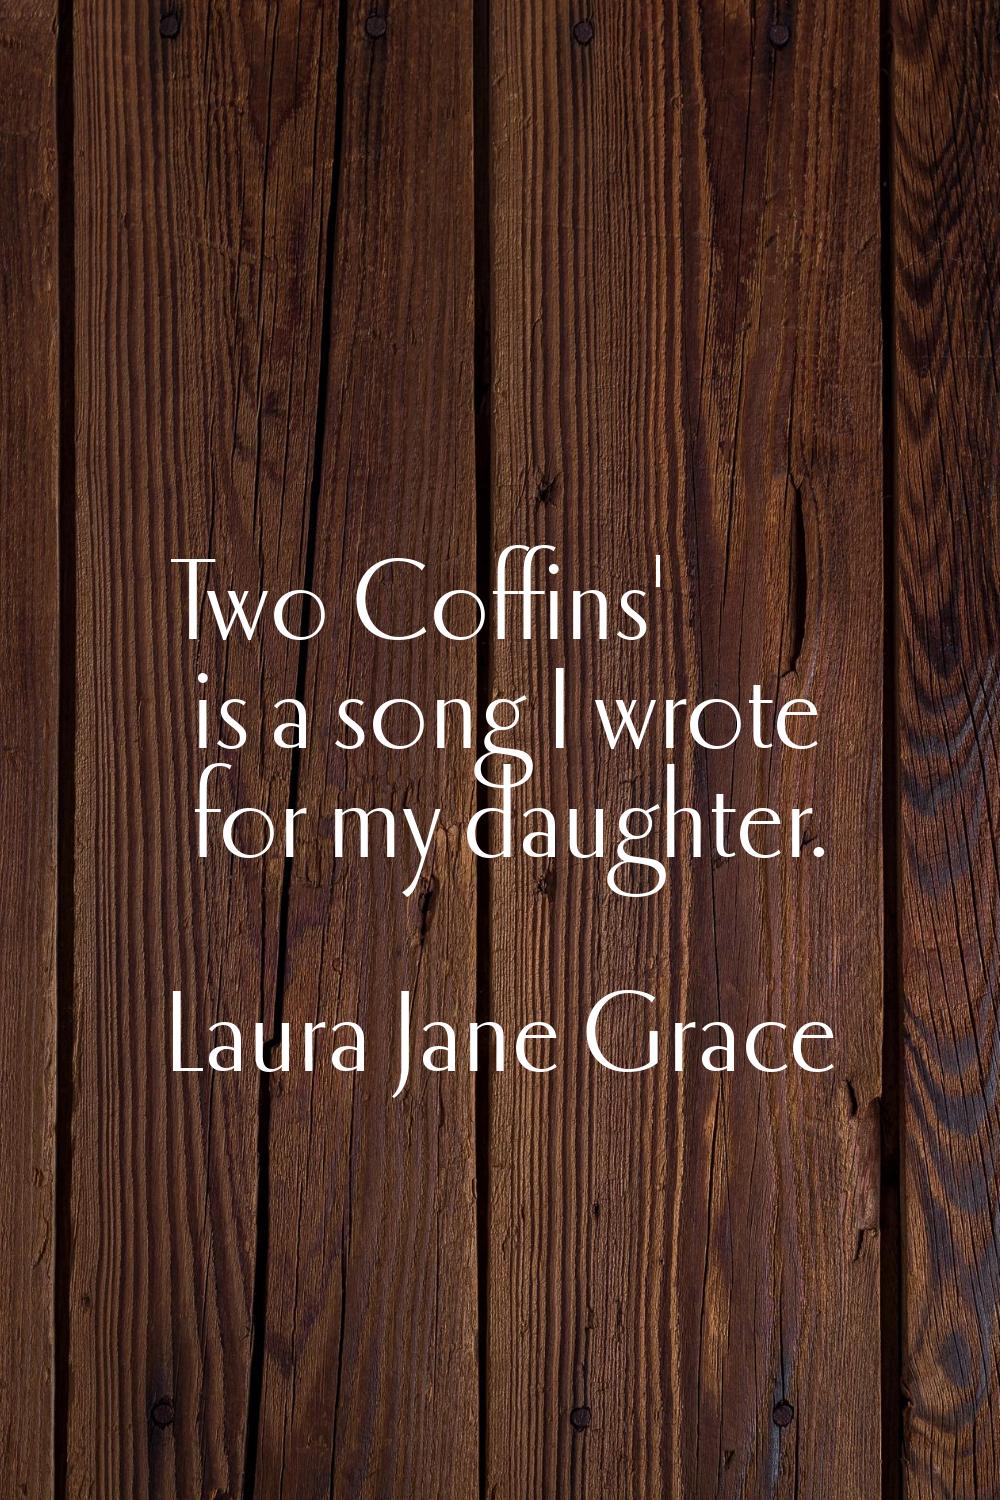 Two Coffins' is a song I wrote for my daughter.